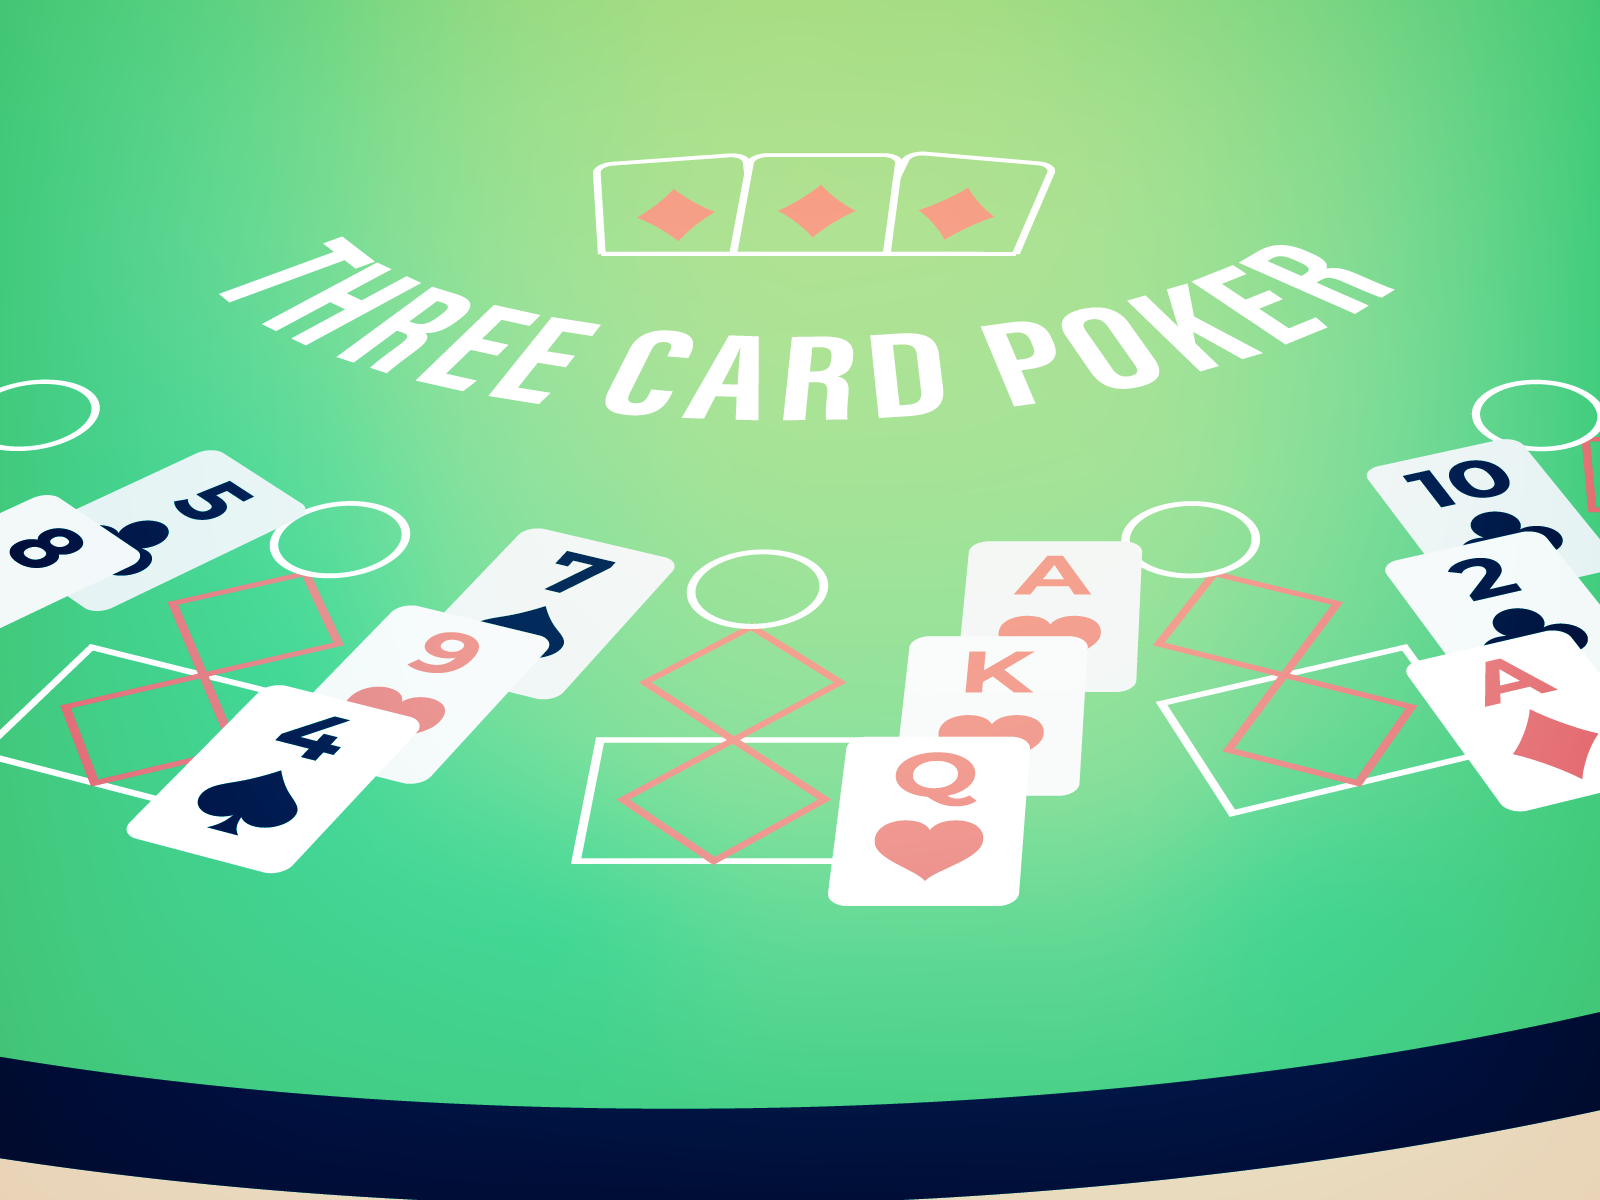 4 Card Poker Rules & Strategy - How to Play 4 Card Poker